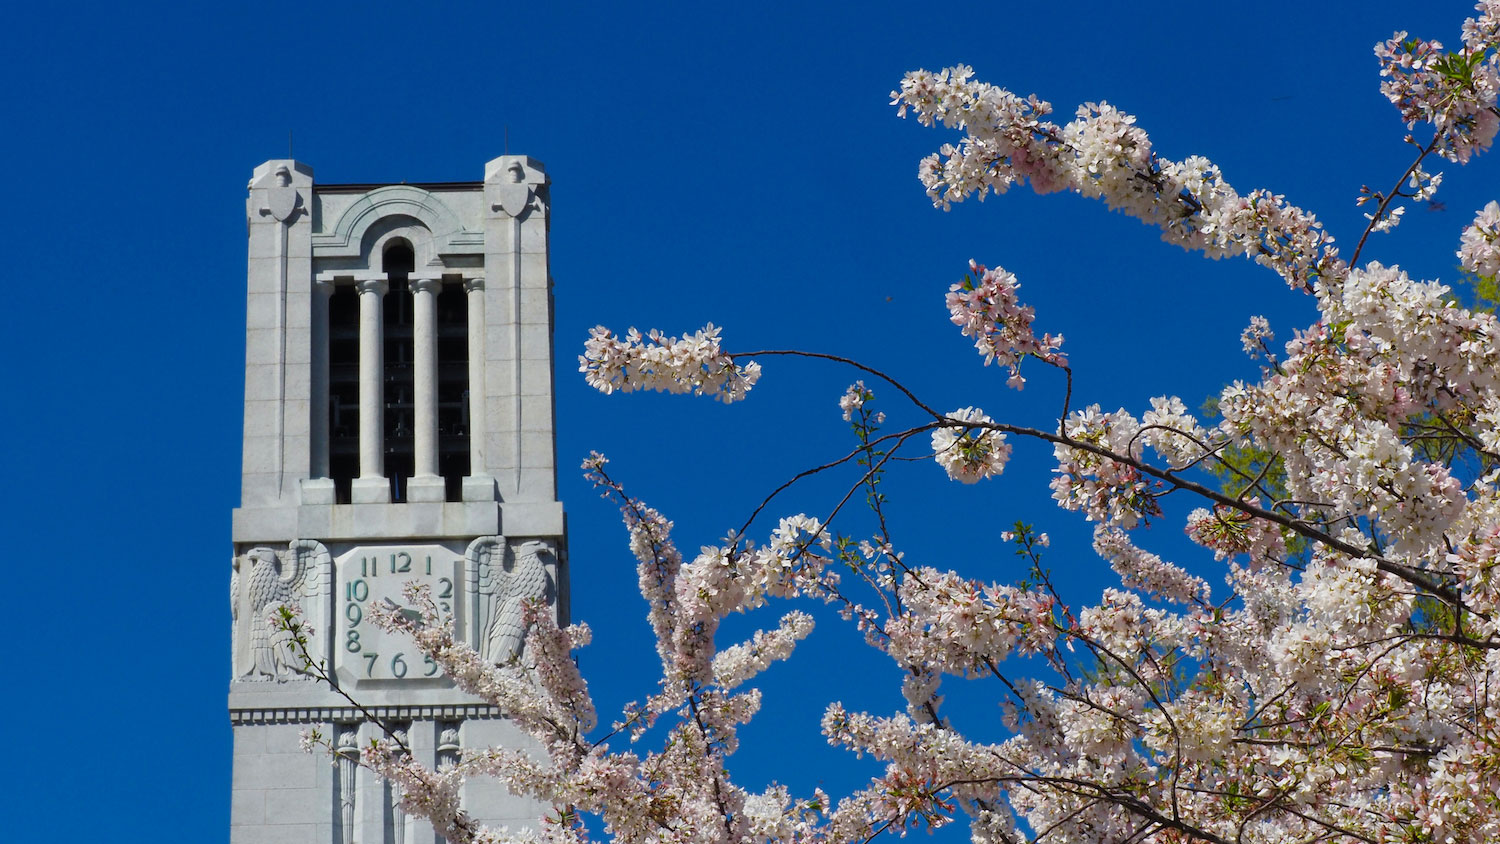 The NC State belltower stands, surrounded by blooms of spring.